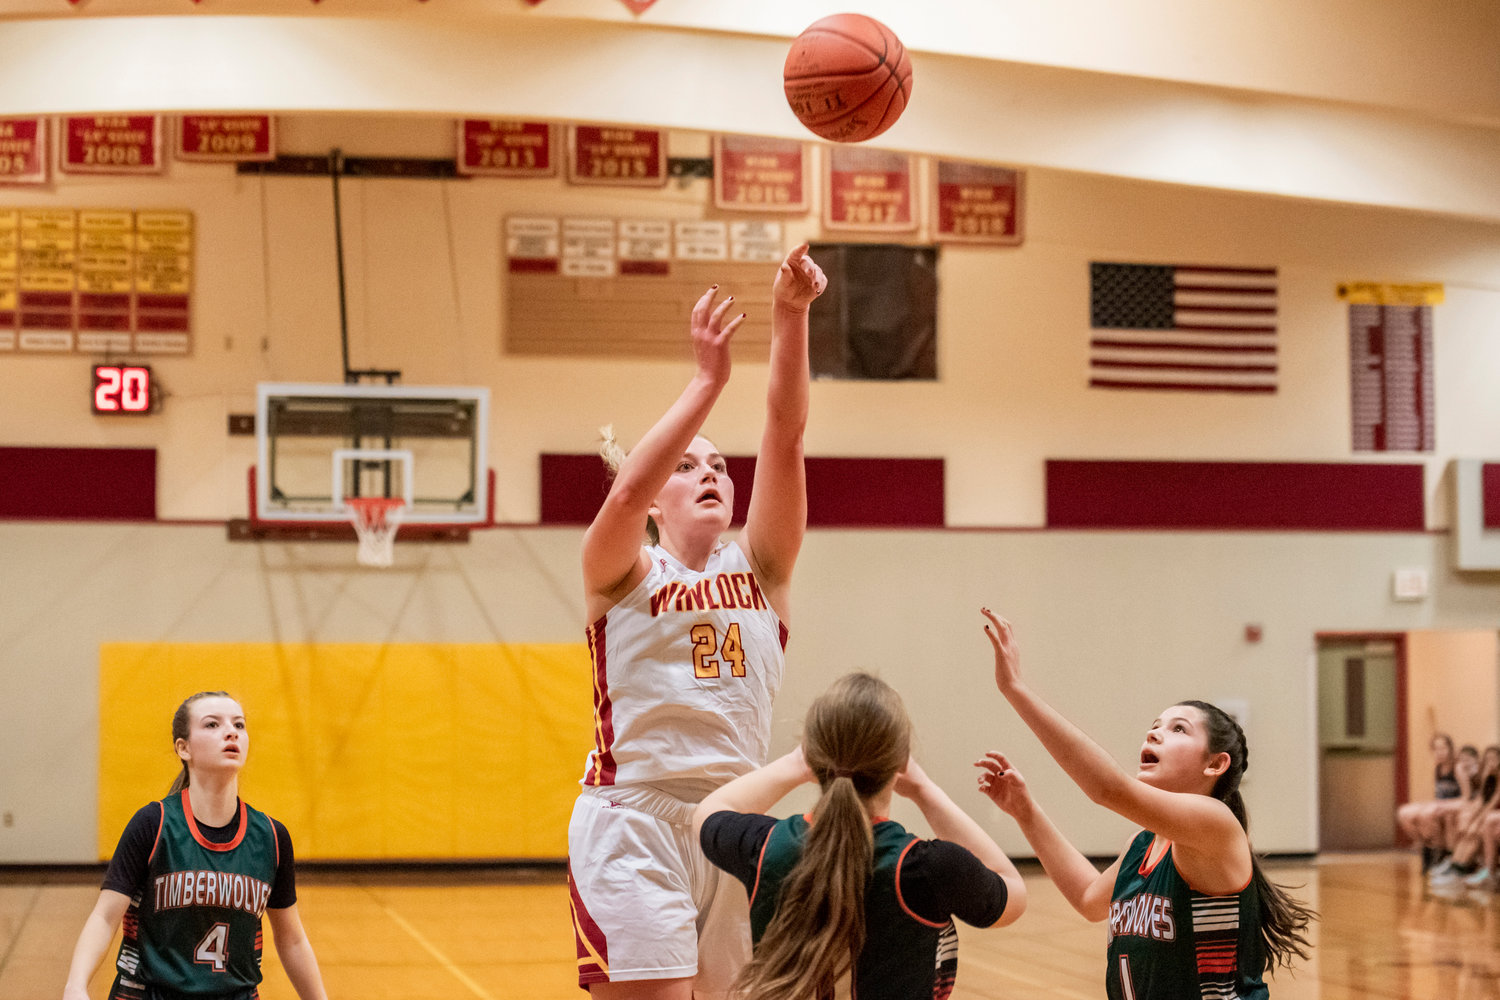 Winlock’s Addison Hall (24) scores over Timberwolves as they defend during a game Tuesday night.